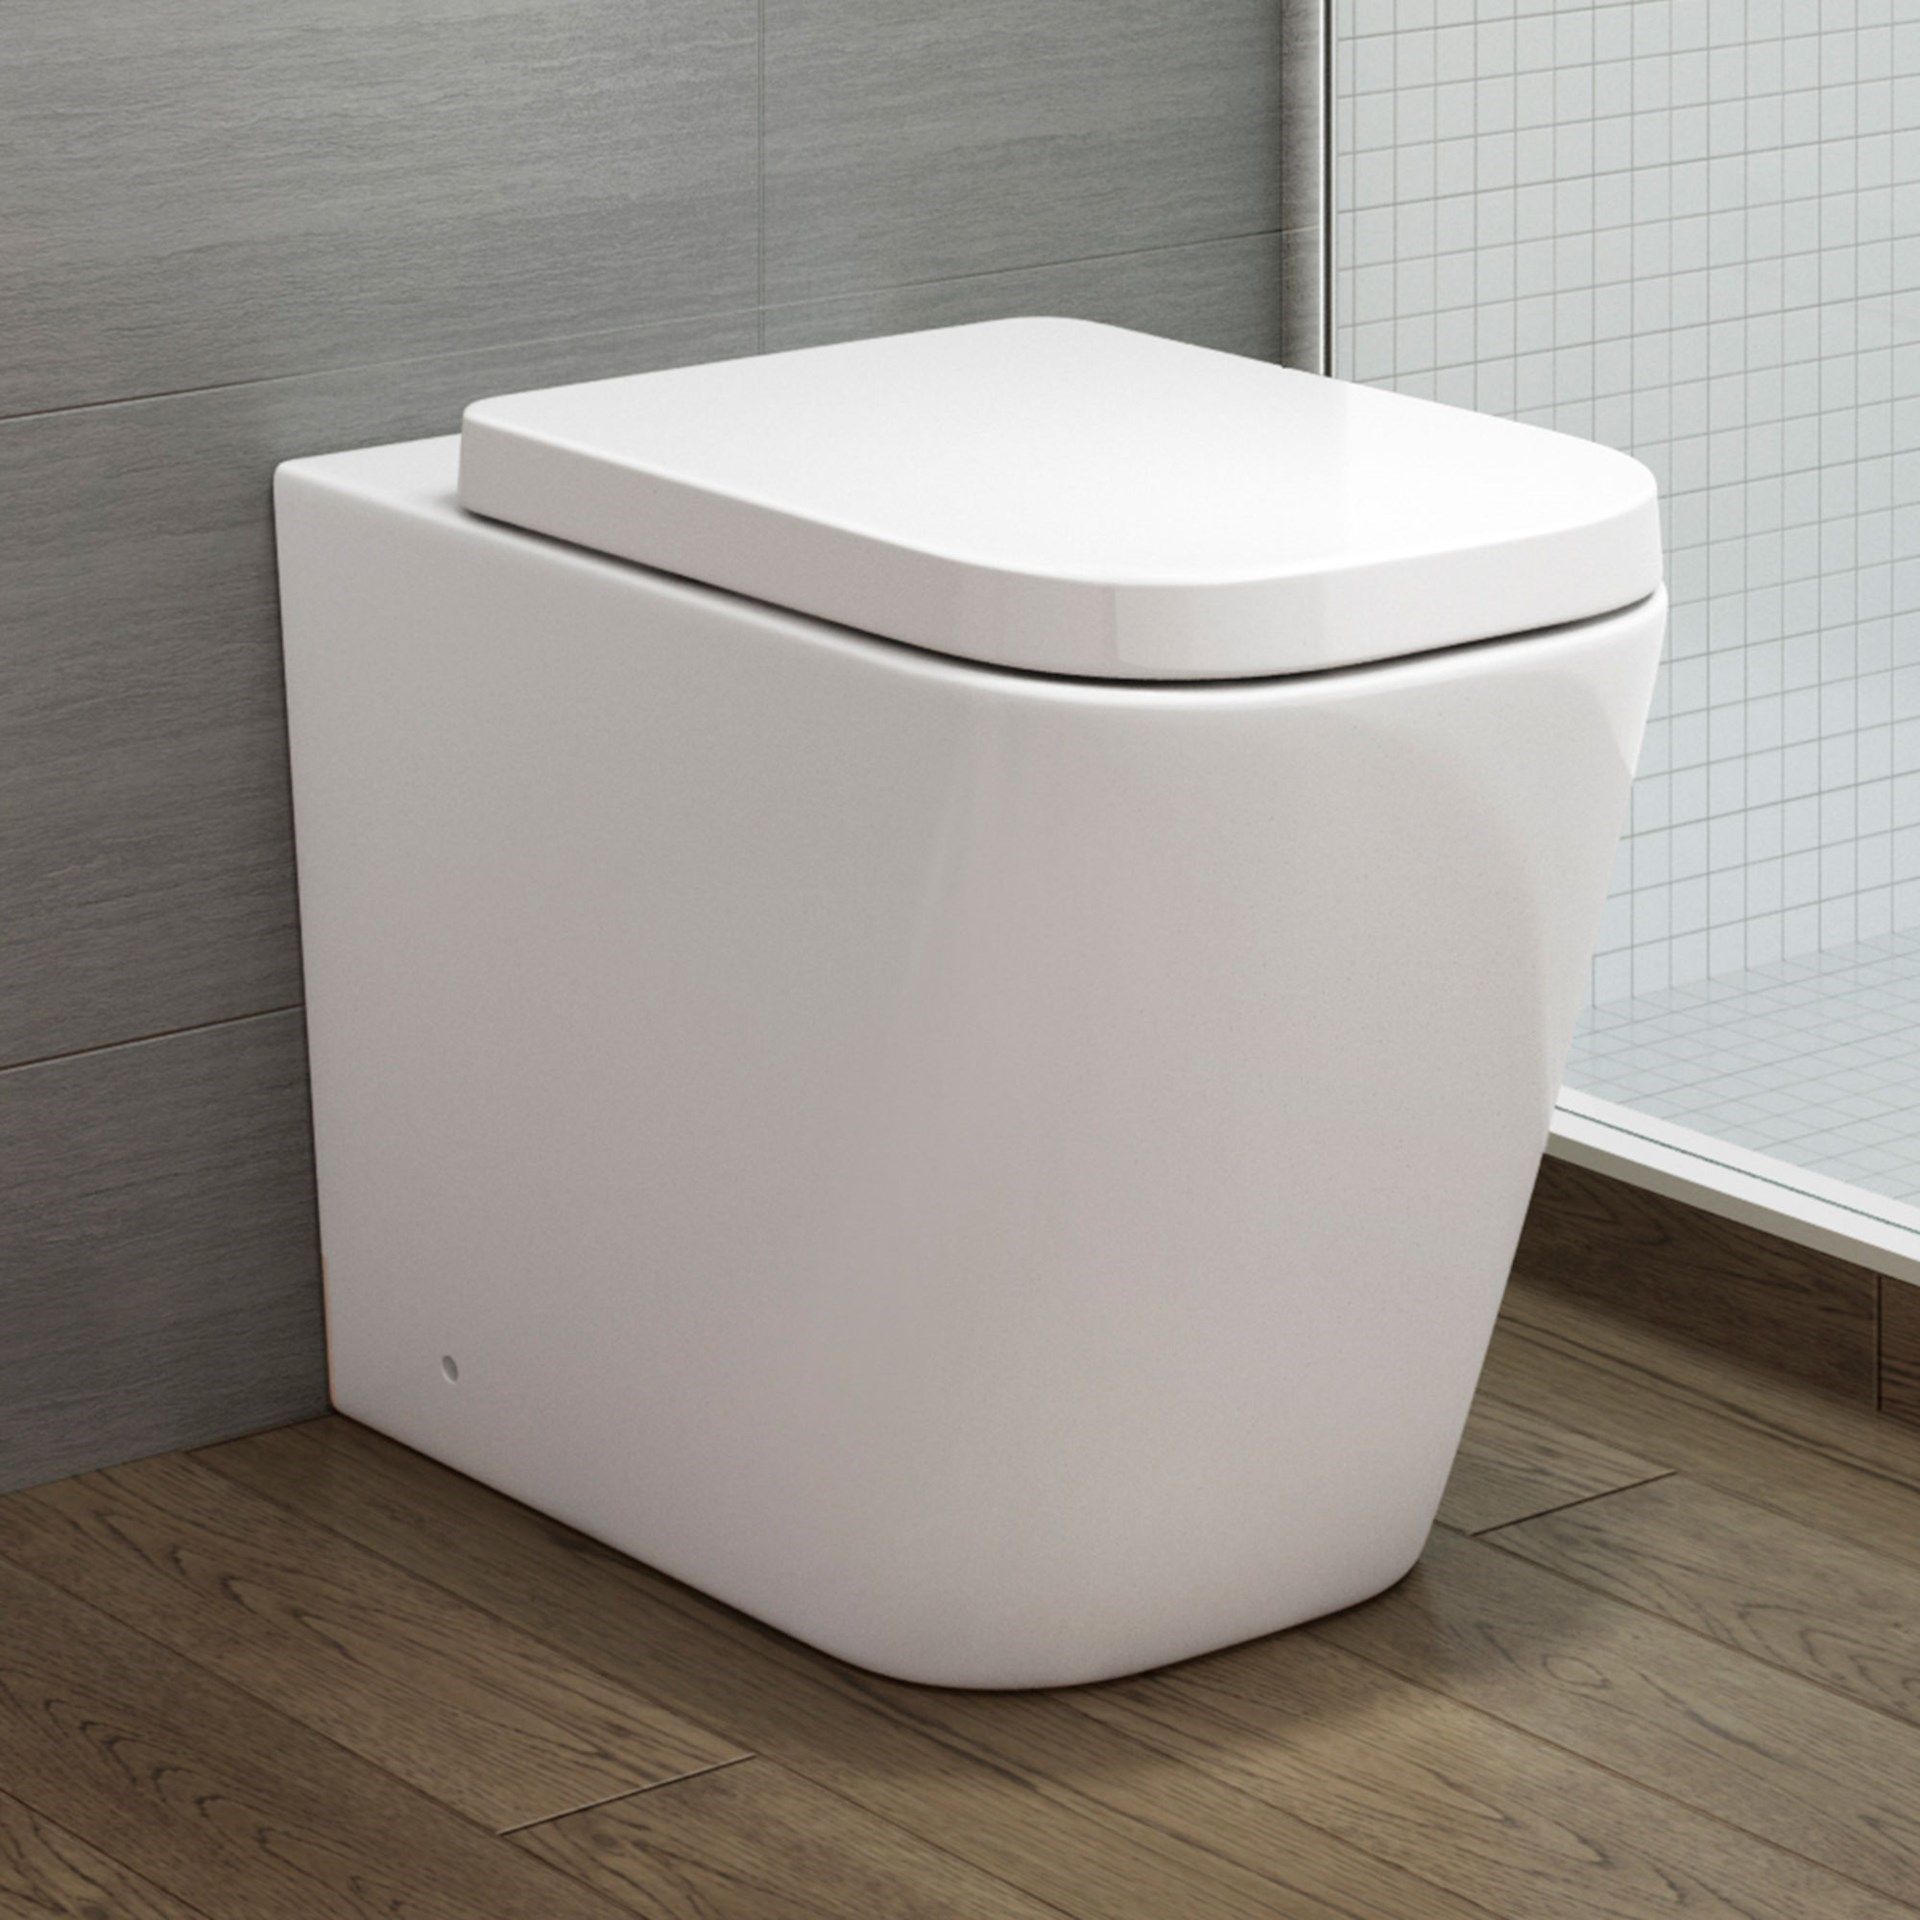 BRAND NEW BOXED Florence Rimless Back to Wall Toilet inc Luxury Soft Close Seat. RRP £349.99. ... - Image 3 of 3